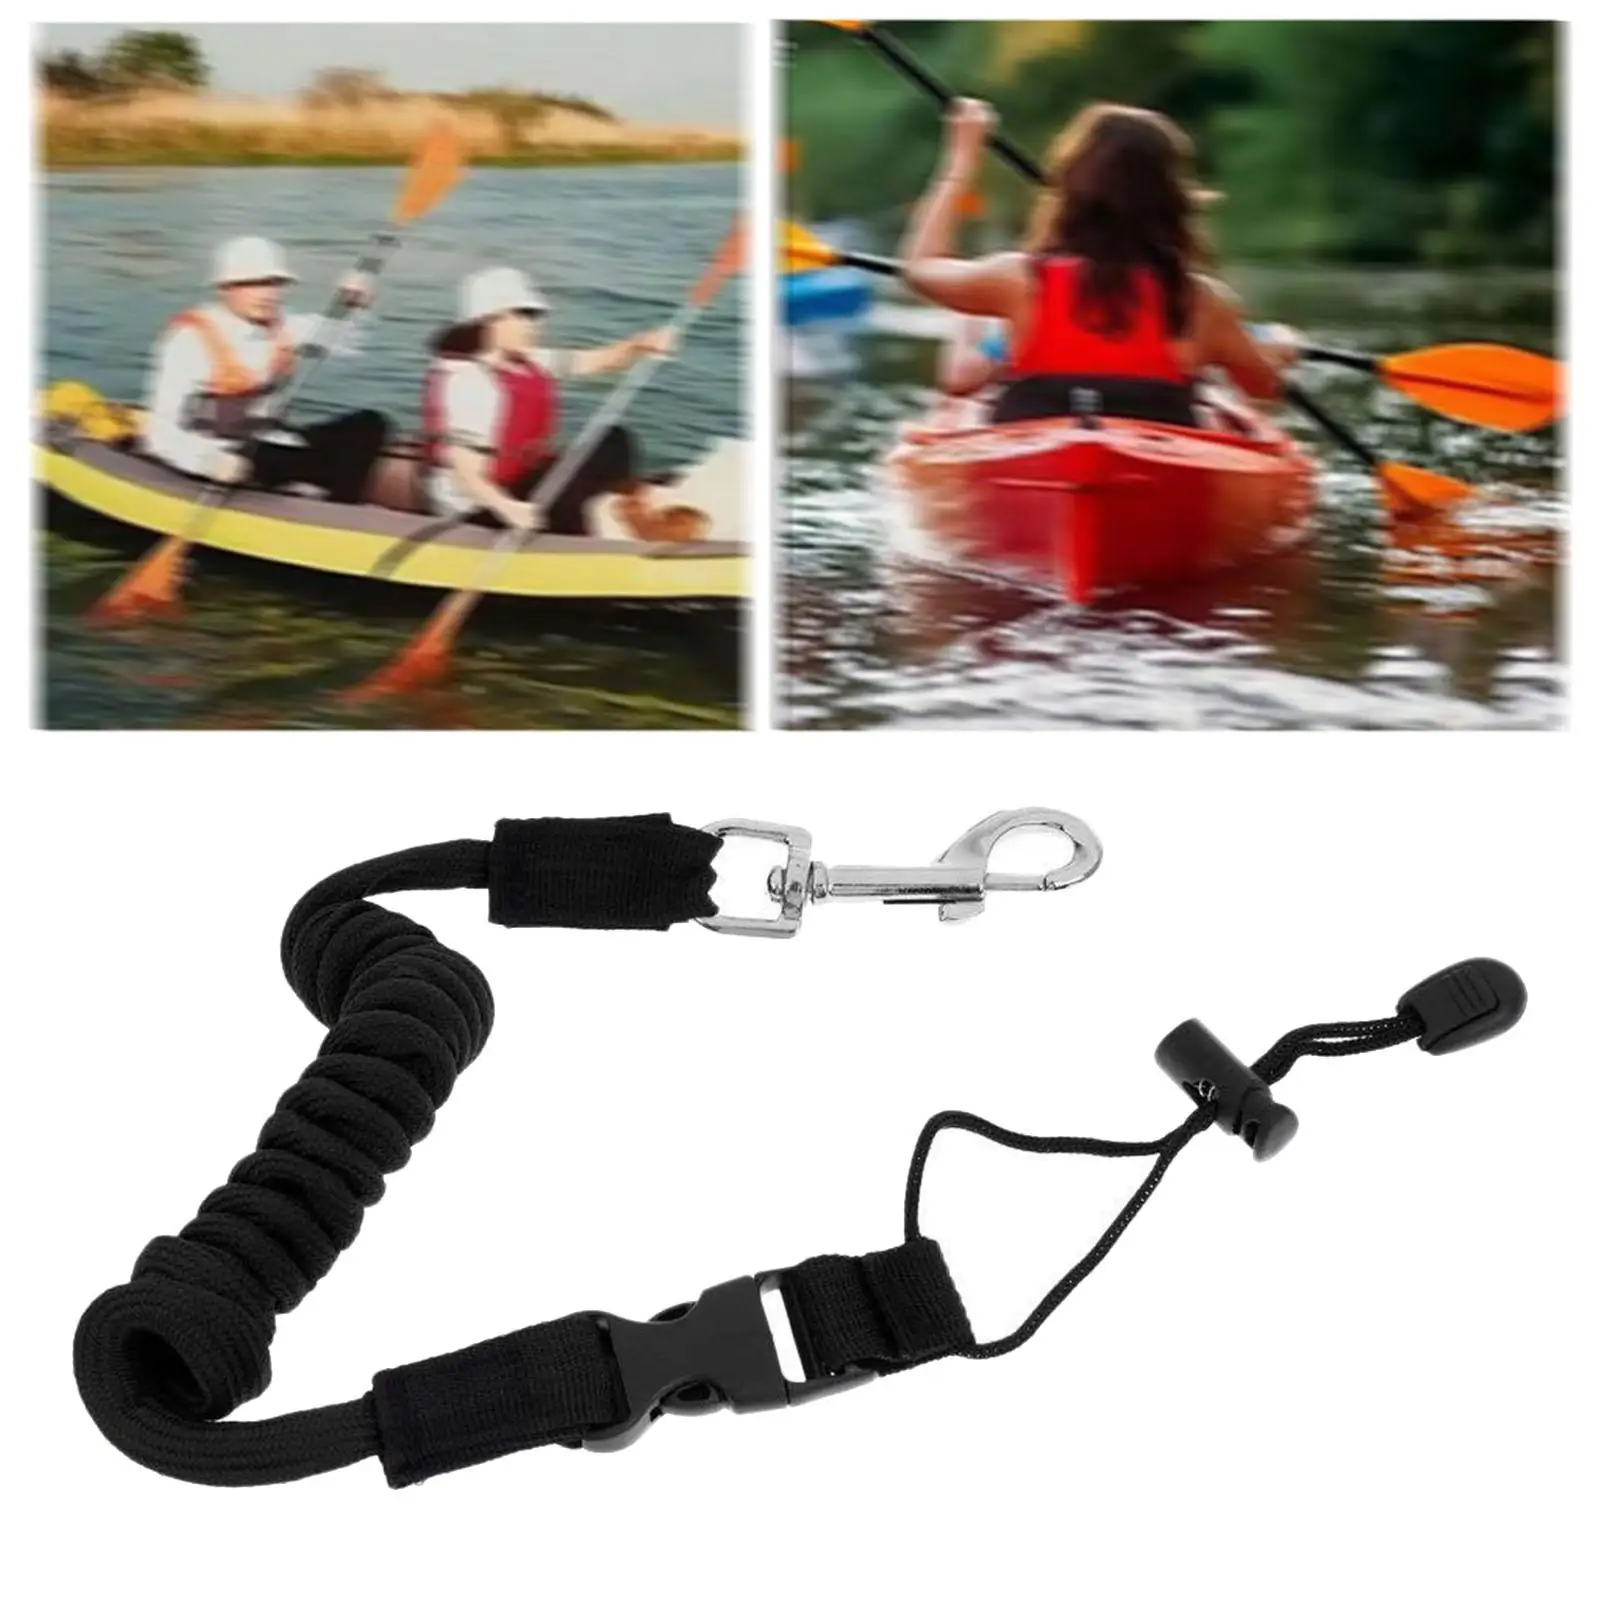 Kayak Paddle Tether Leash Holder Kayak Accessories Stretchable Leash Coiled Fishing Rod Leash for Boating Fishing Pole Canoeing